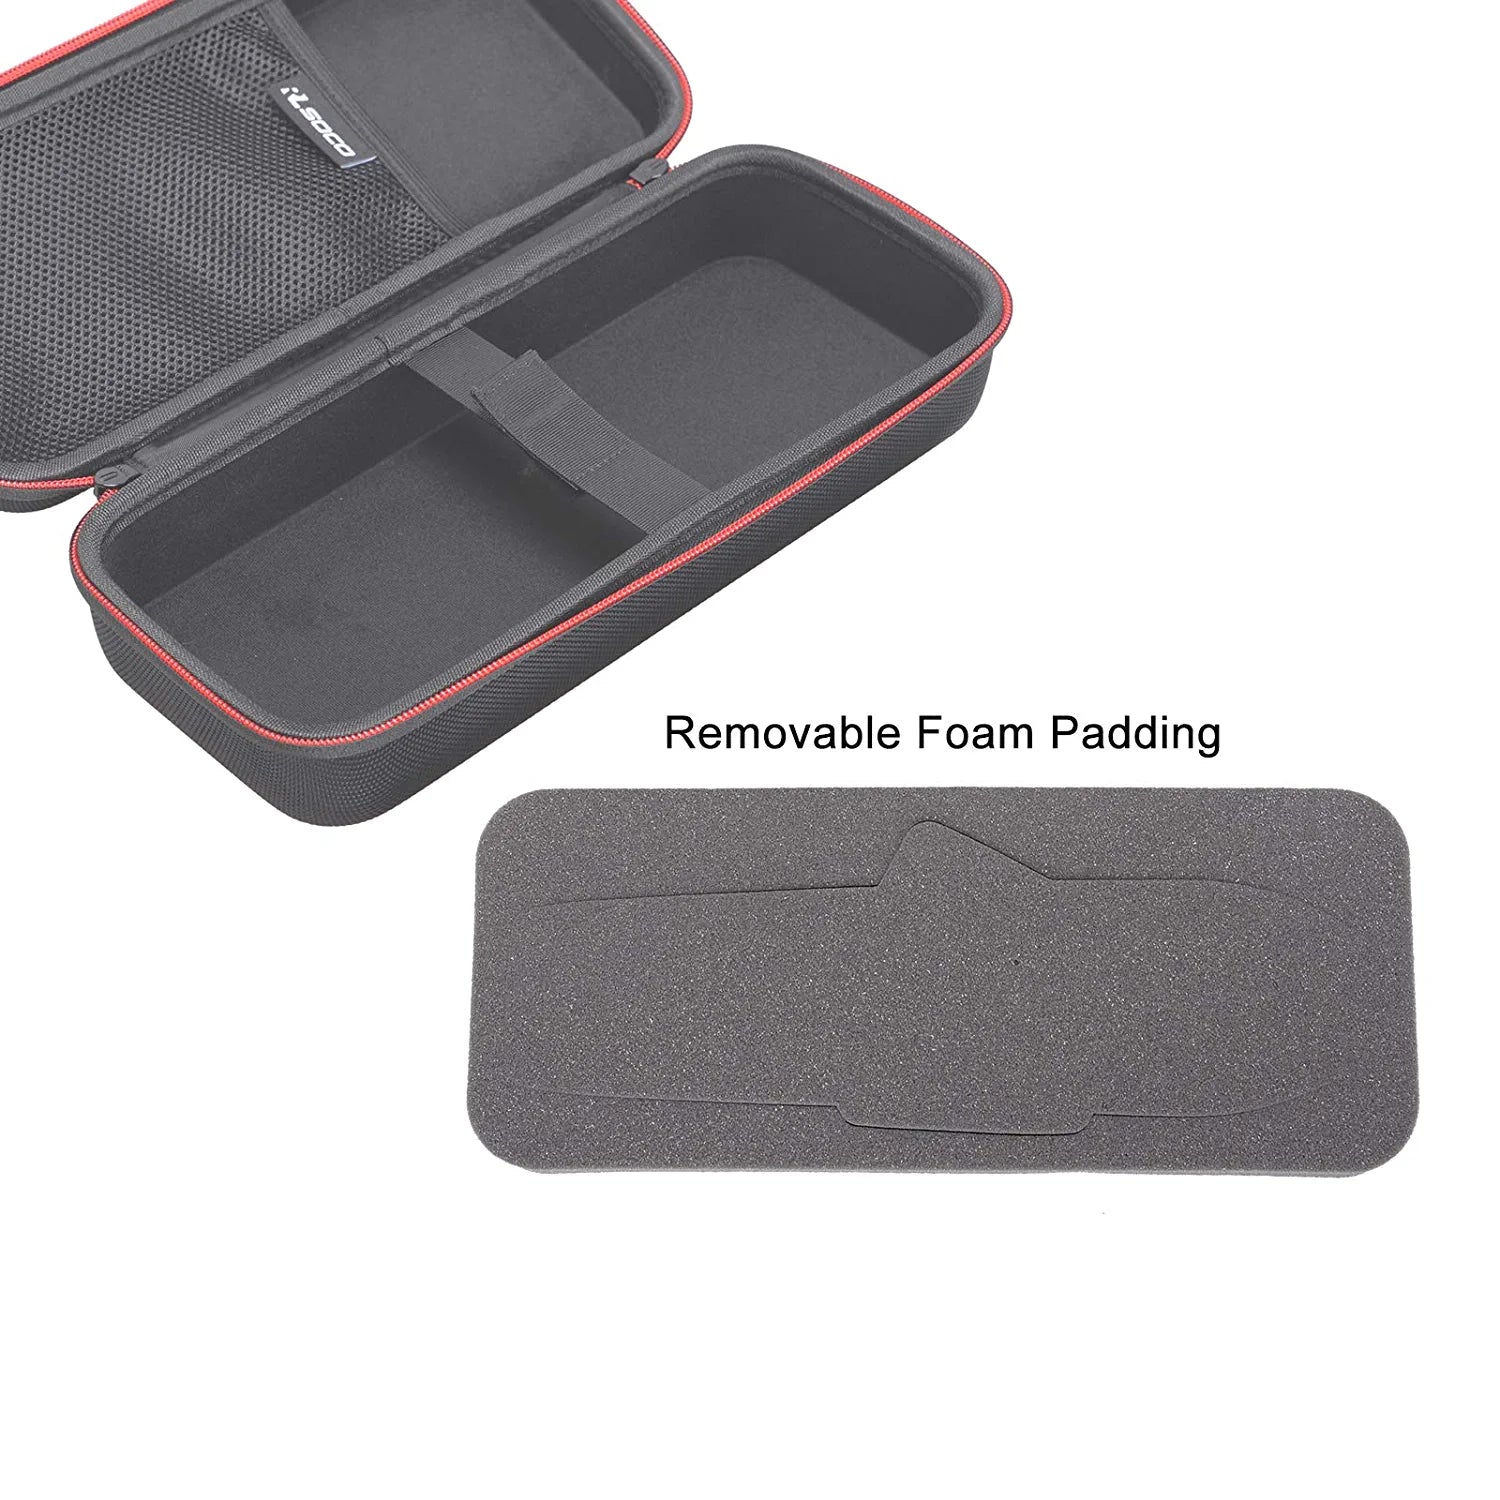 Carrying Case for Fluke 374/375/376FC/376/902/902 FC True-Rms Clamp Meter & Works with KAIWEETS Digital Clamp Meter HT208A/HT208D